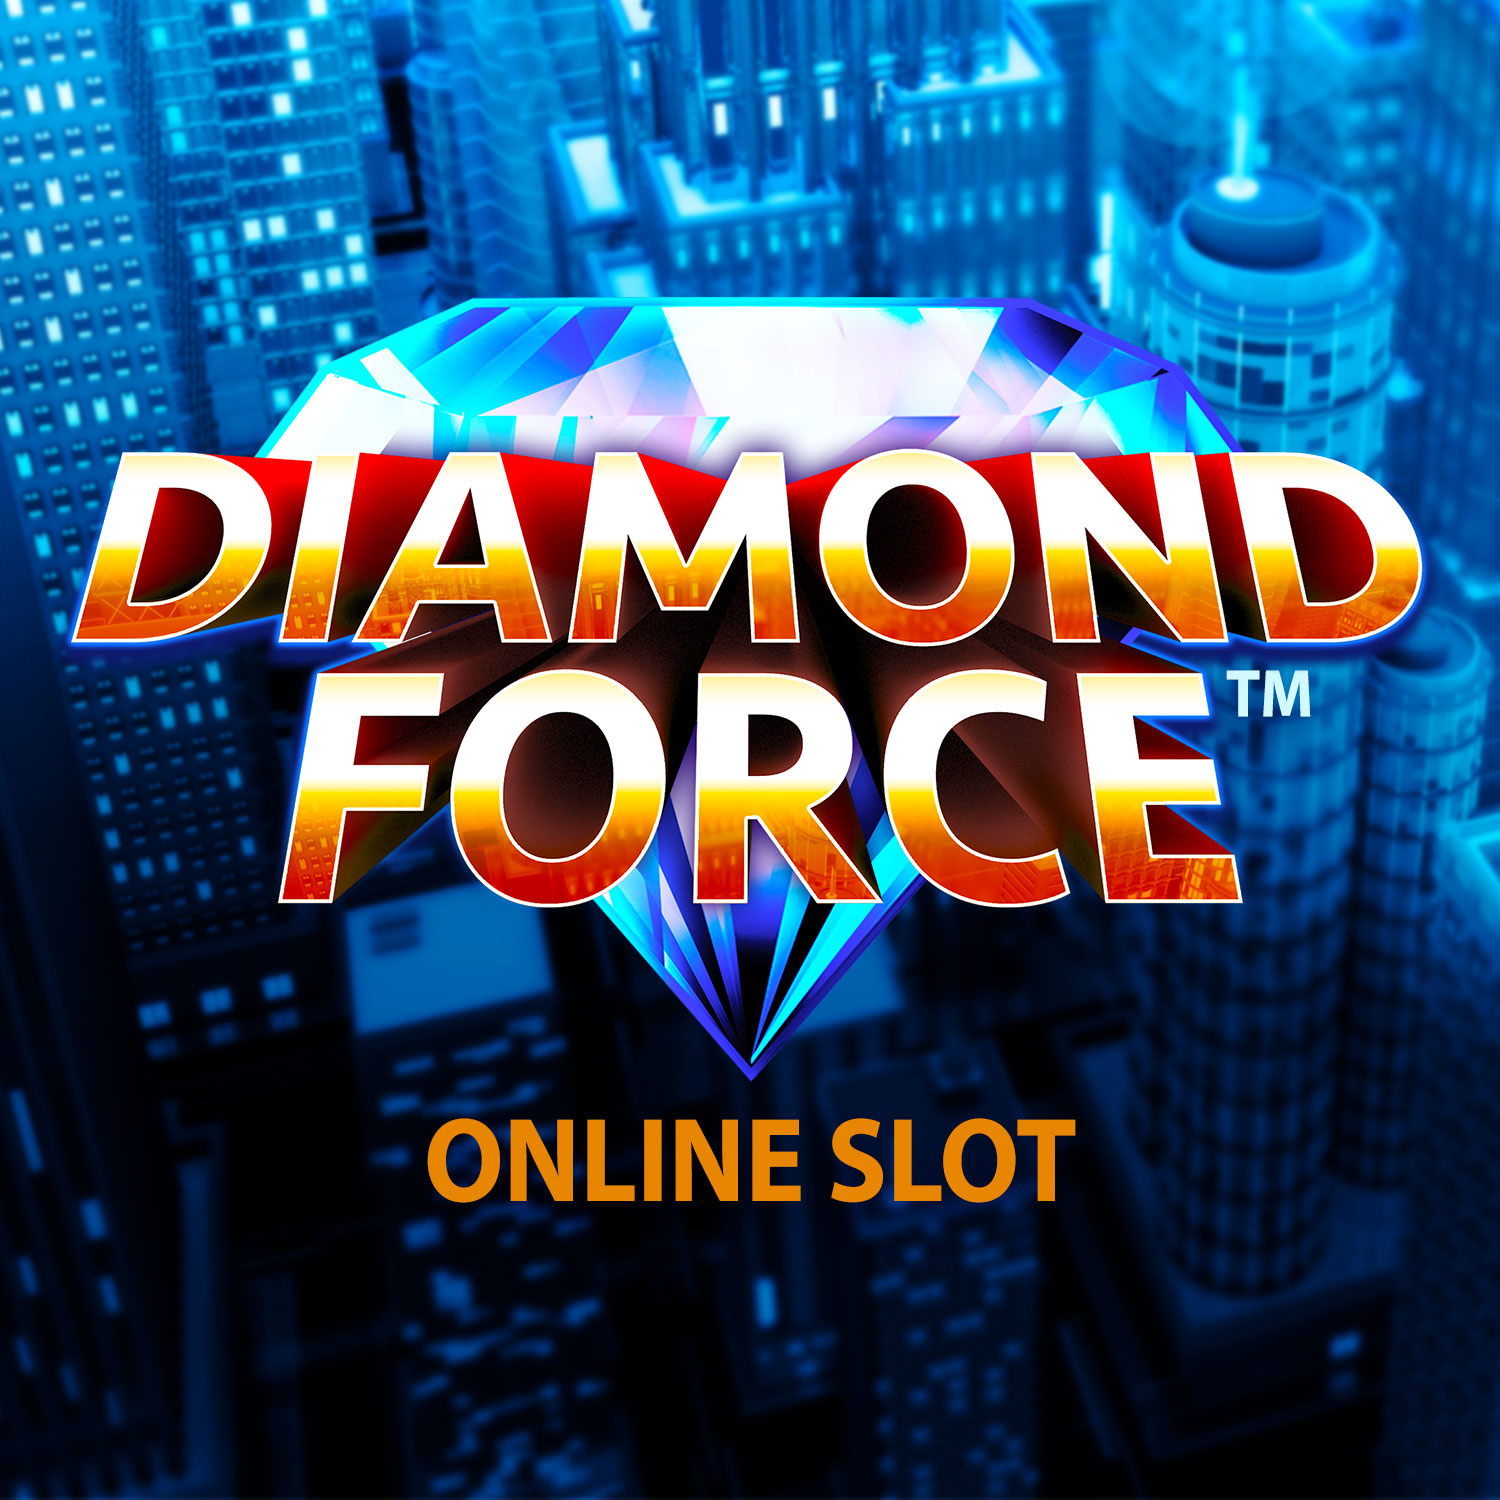 Diamond Force™ To The Rescue